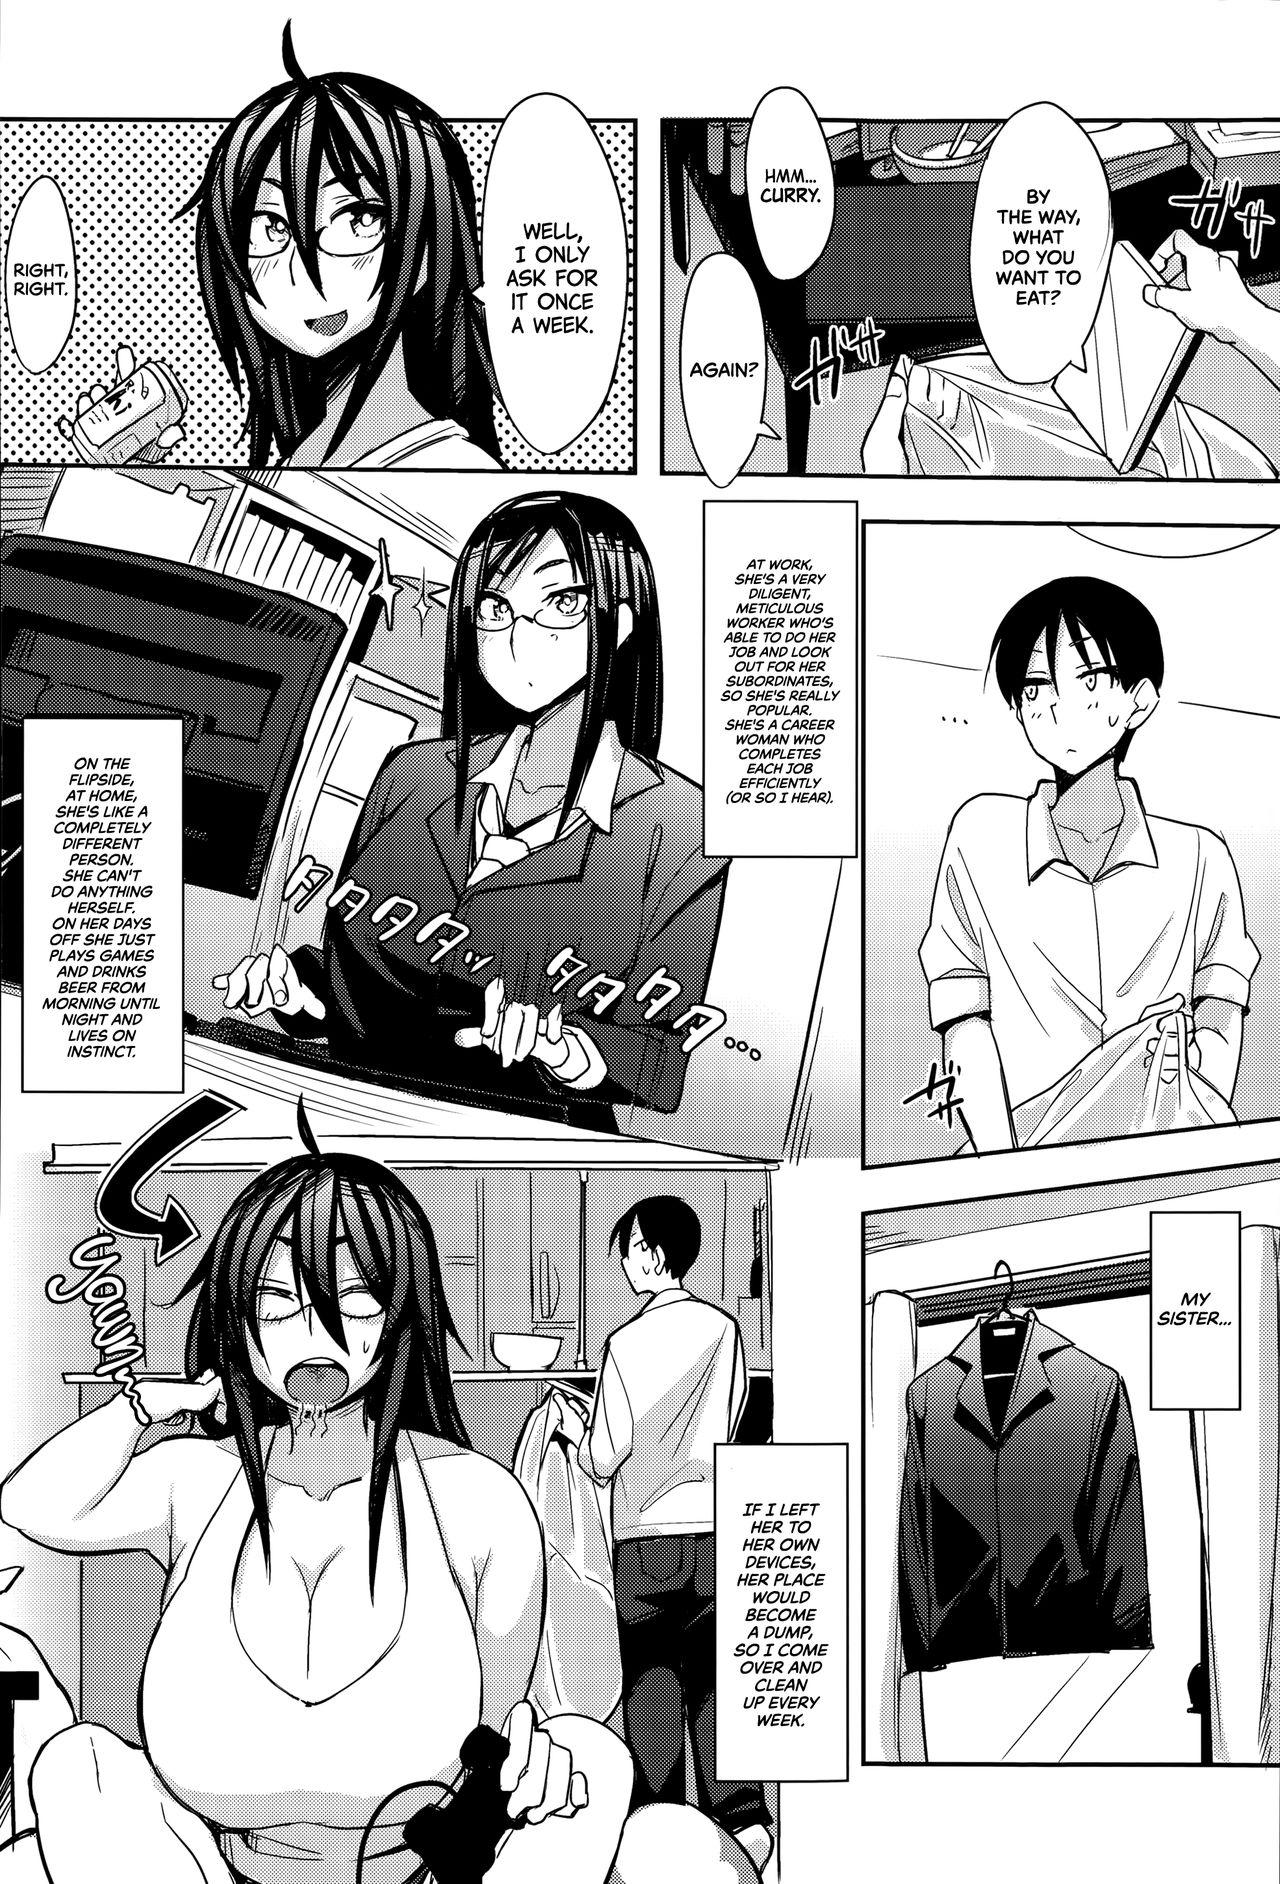 Hymen Onee-chan no Uragao | My Sister's Other Side Girl Fucked Hard - Page 2